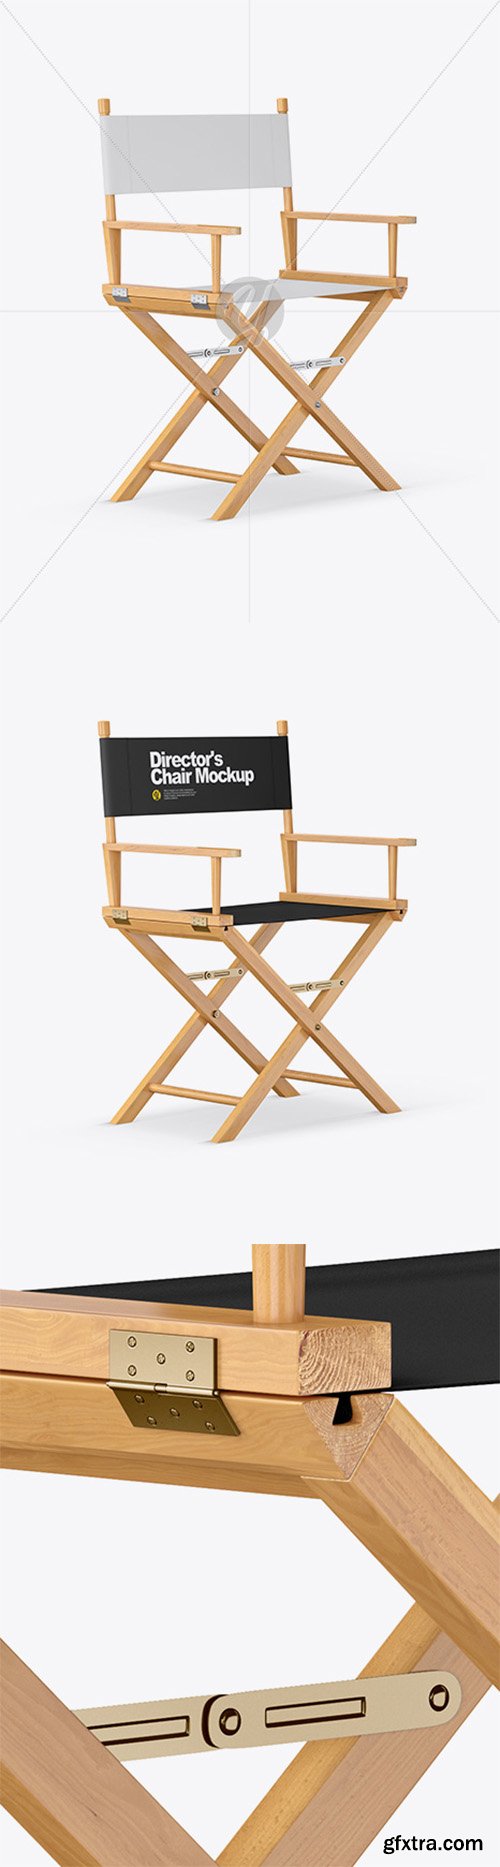 Wooden Director\'s Chair Mockup 36878